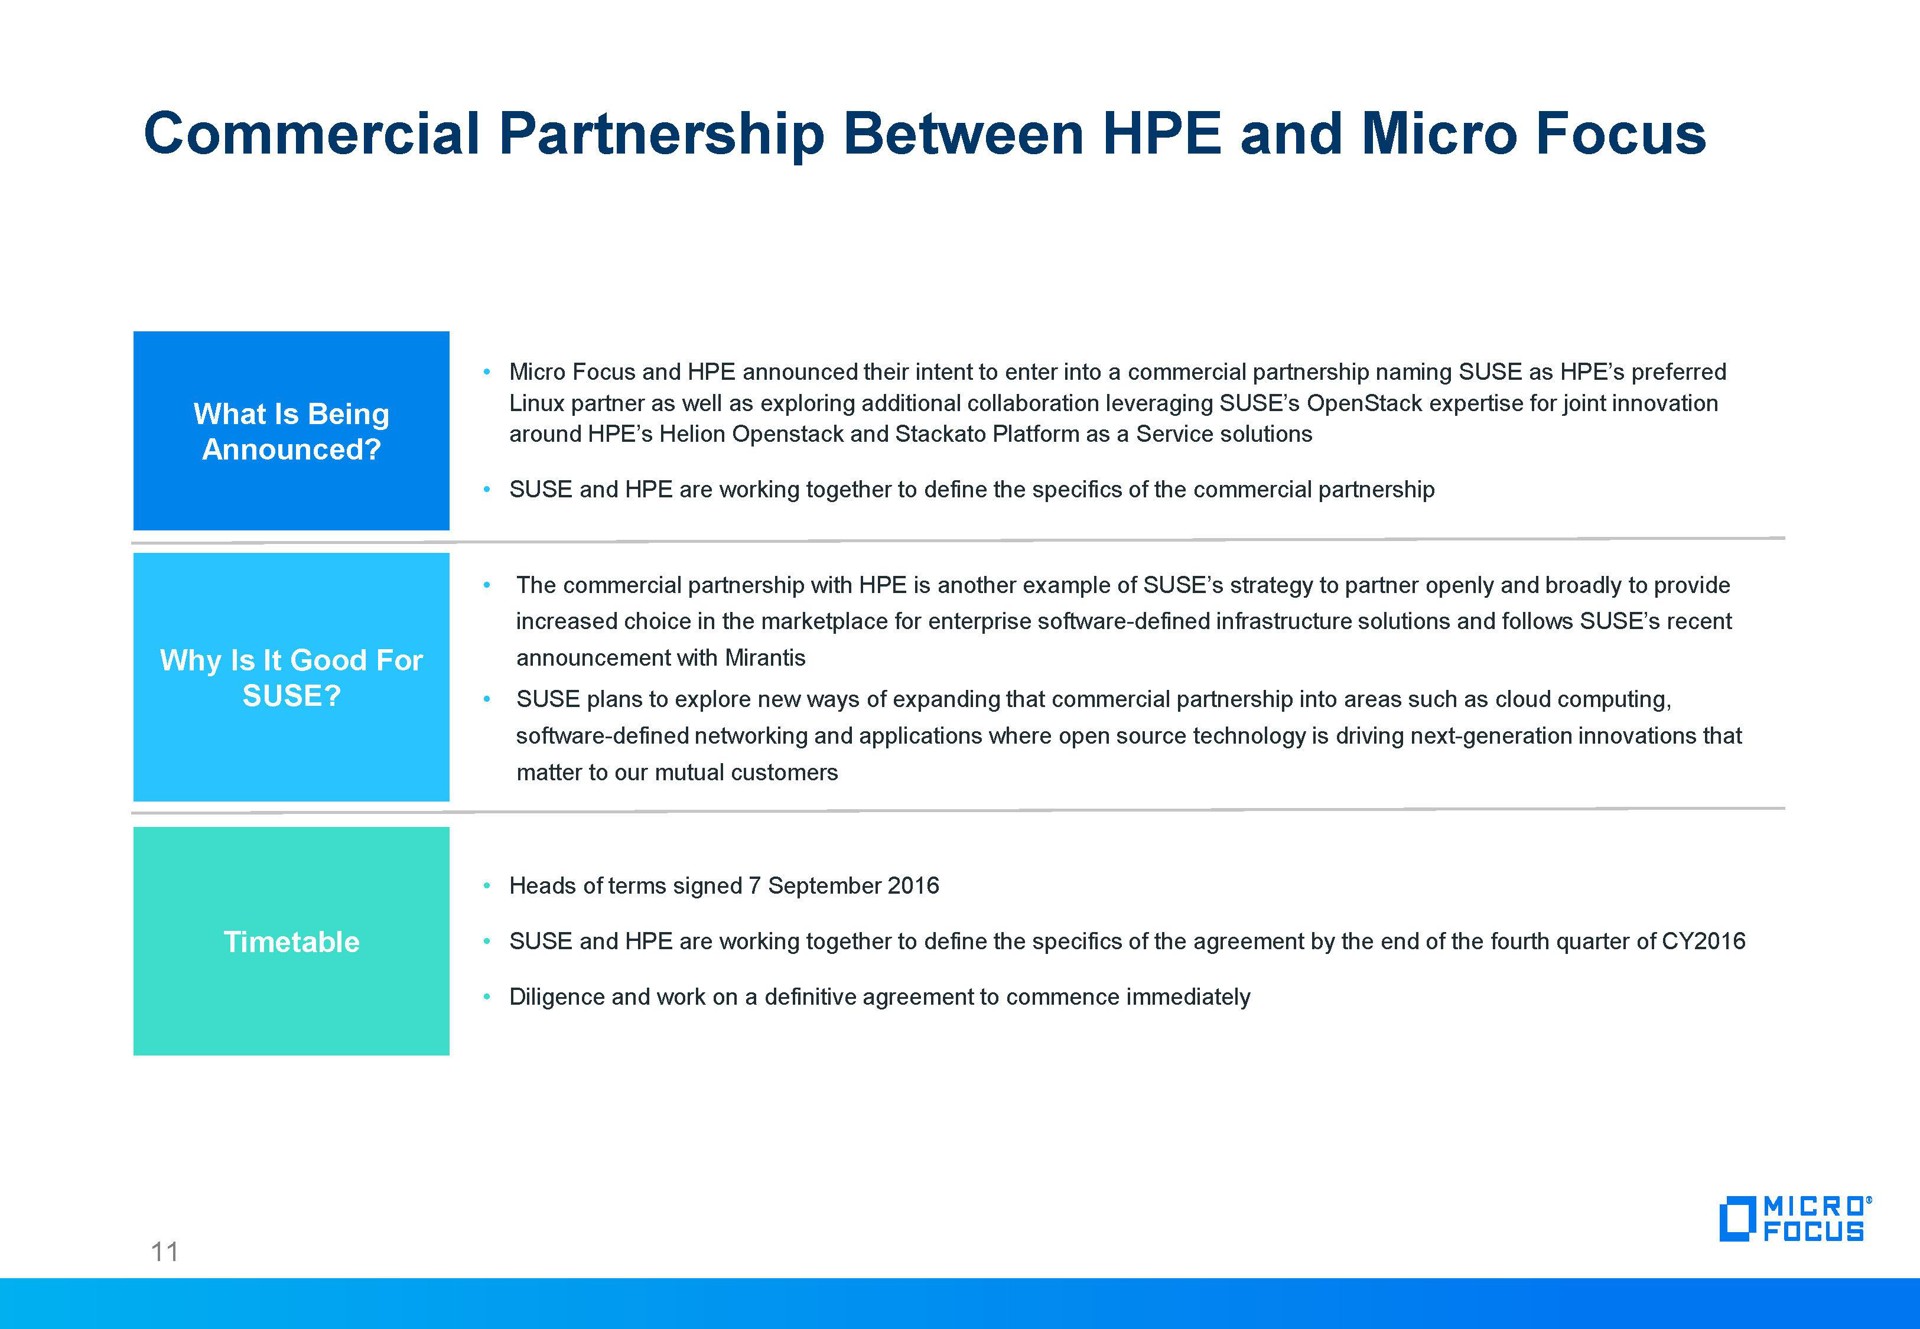 commercial partnership between and micro focus | Micro Focus